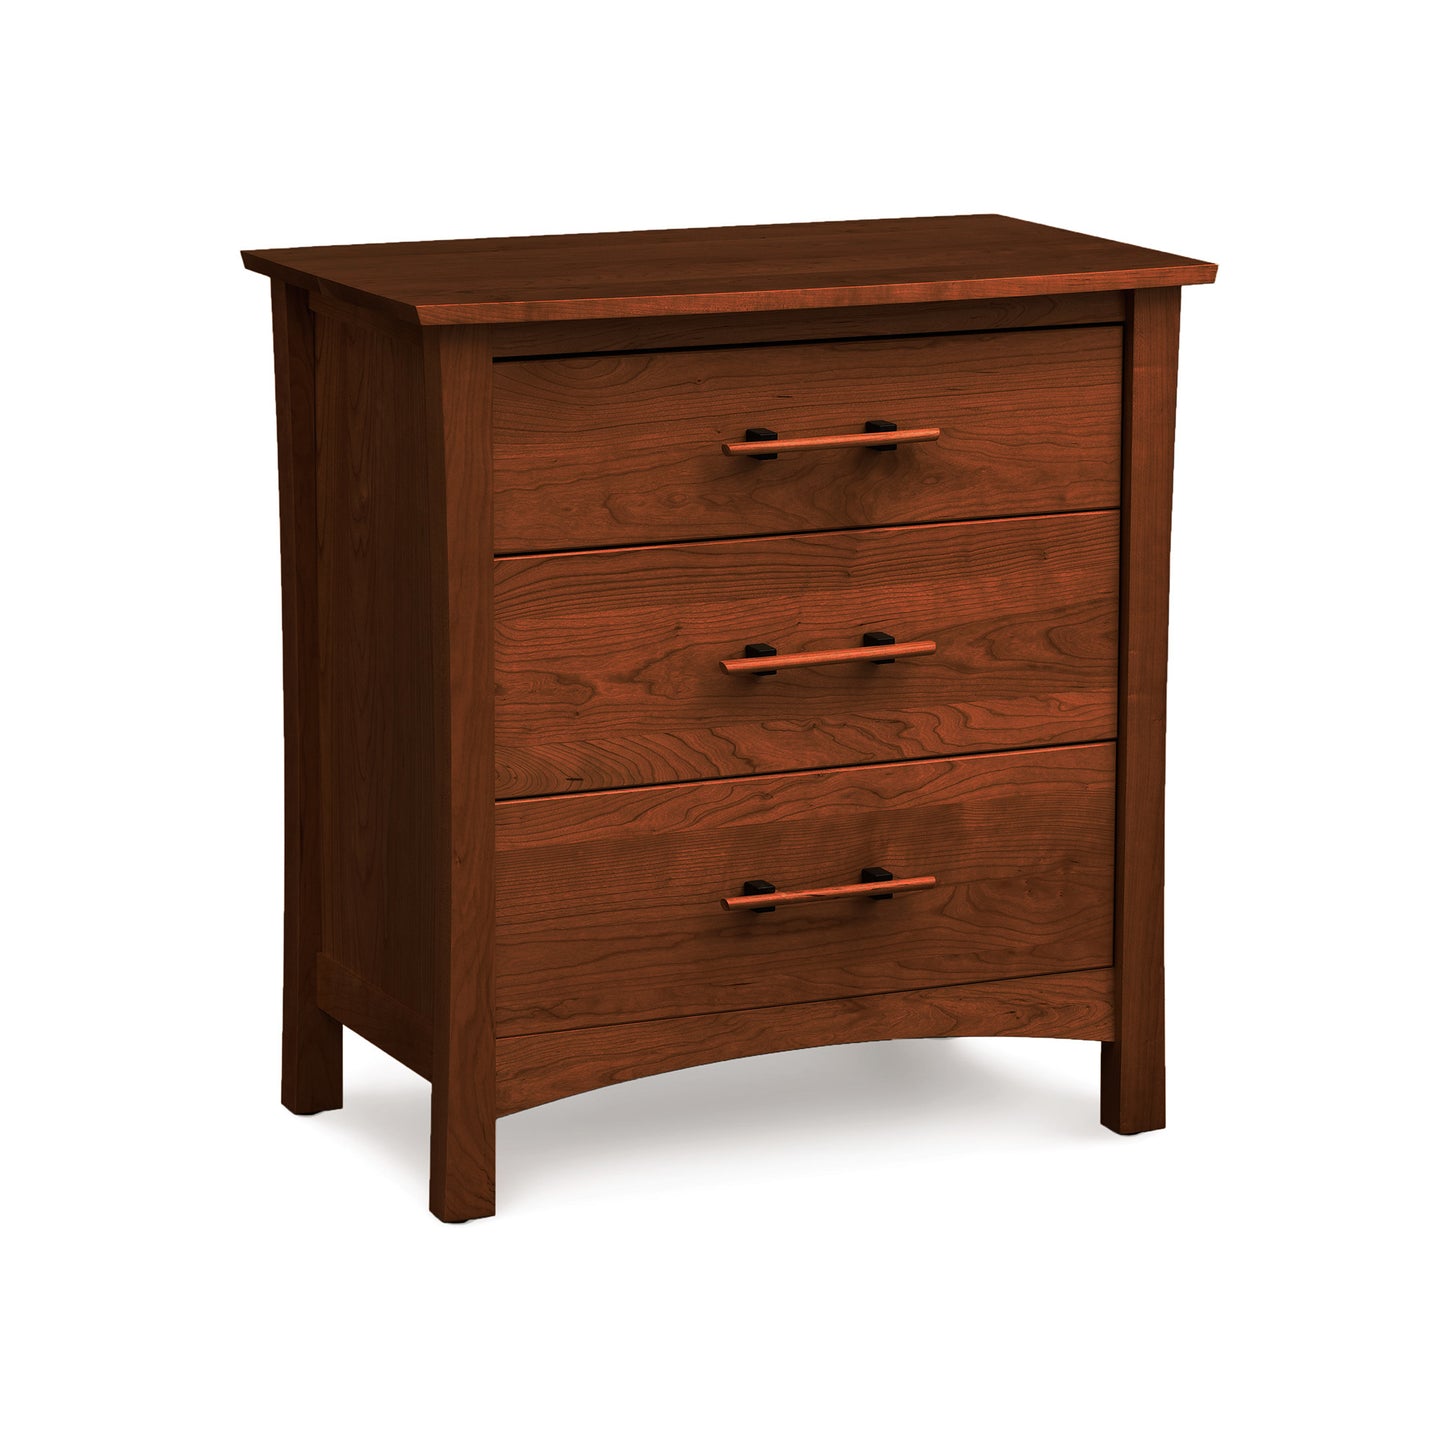 An eco-friendly, wooden Monterey 3-Drawer Chest from Copeland Furniture against a white background.